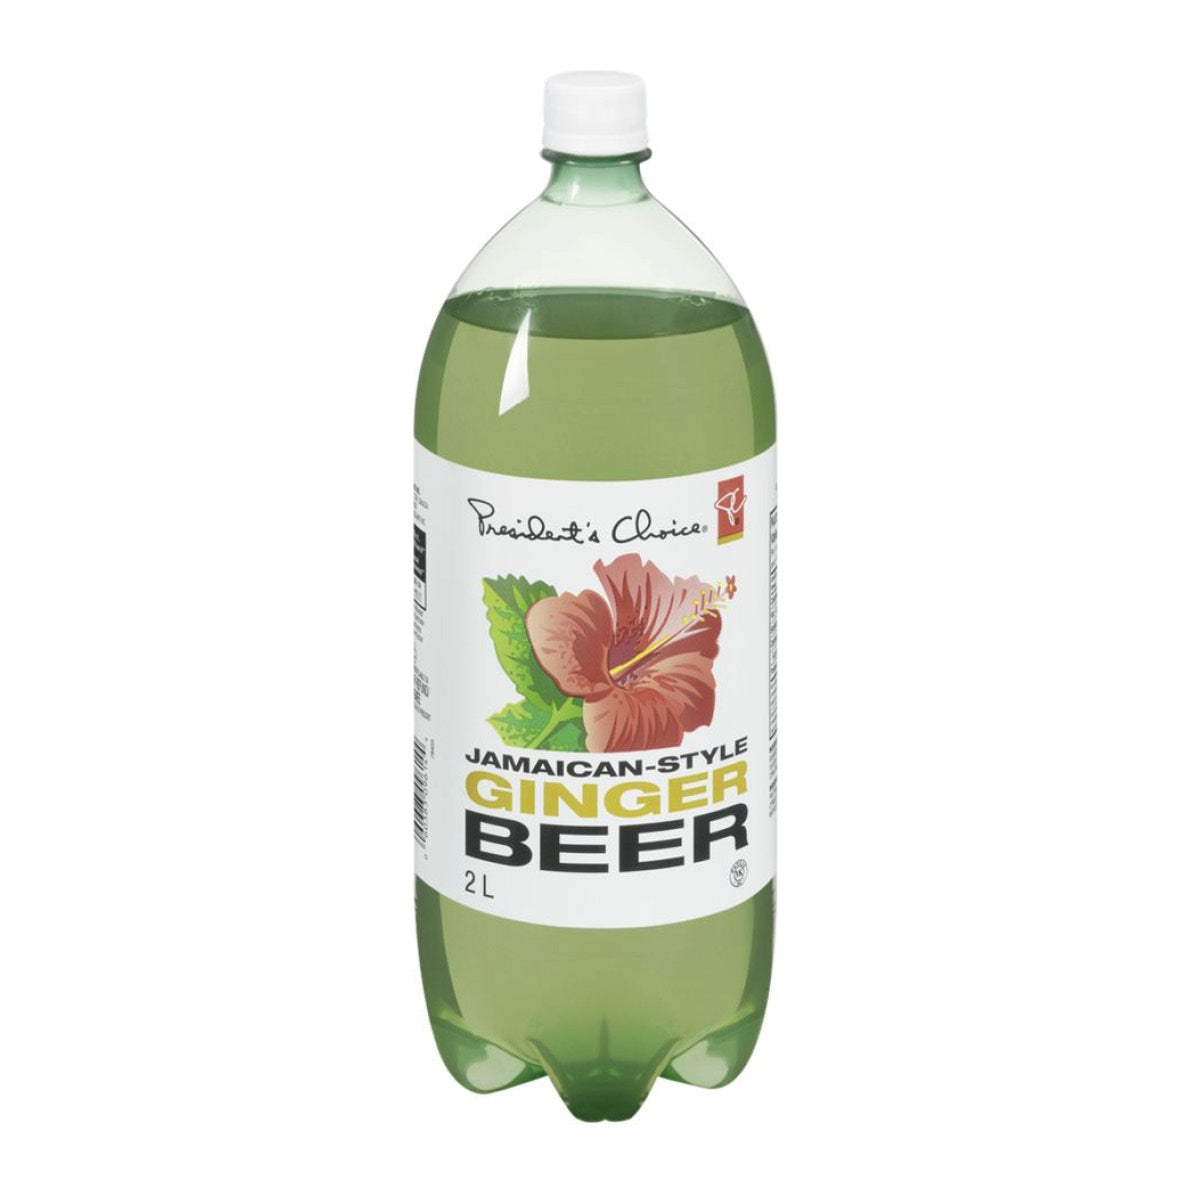 PC Jamaican-Style Ginger Beer, 2L